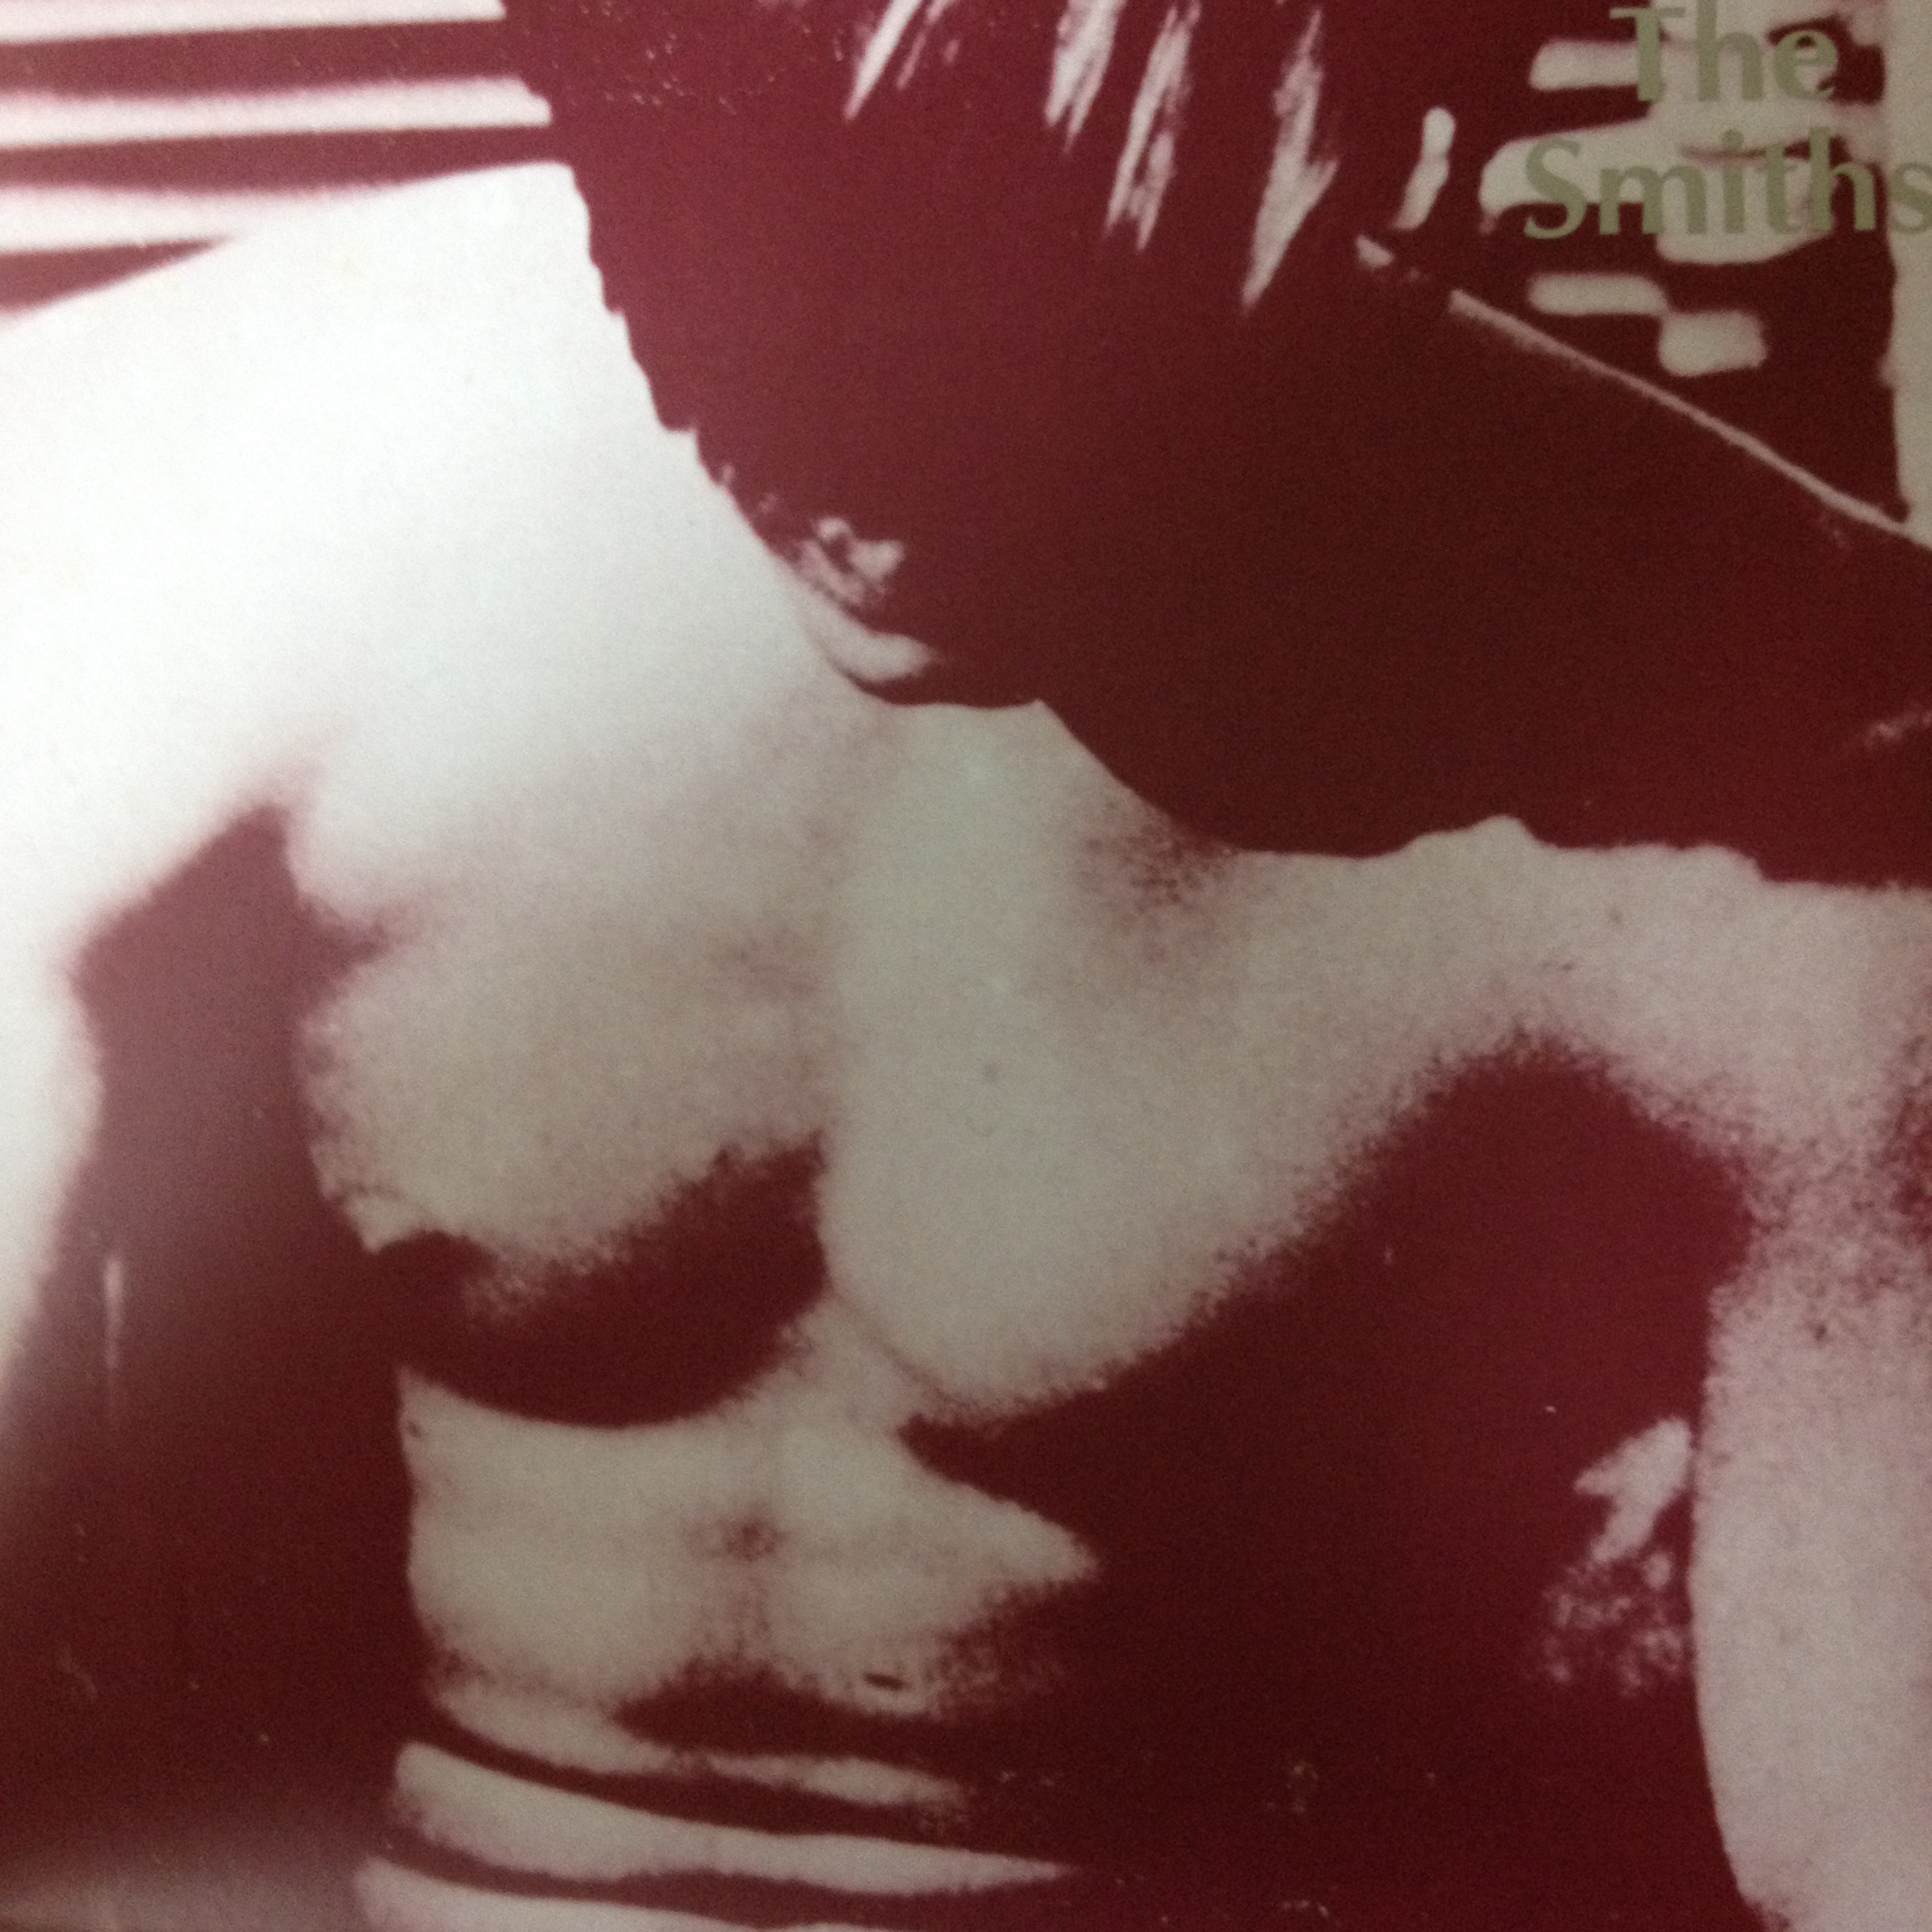 THE SMITHS 「THIS CARMING MAN」